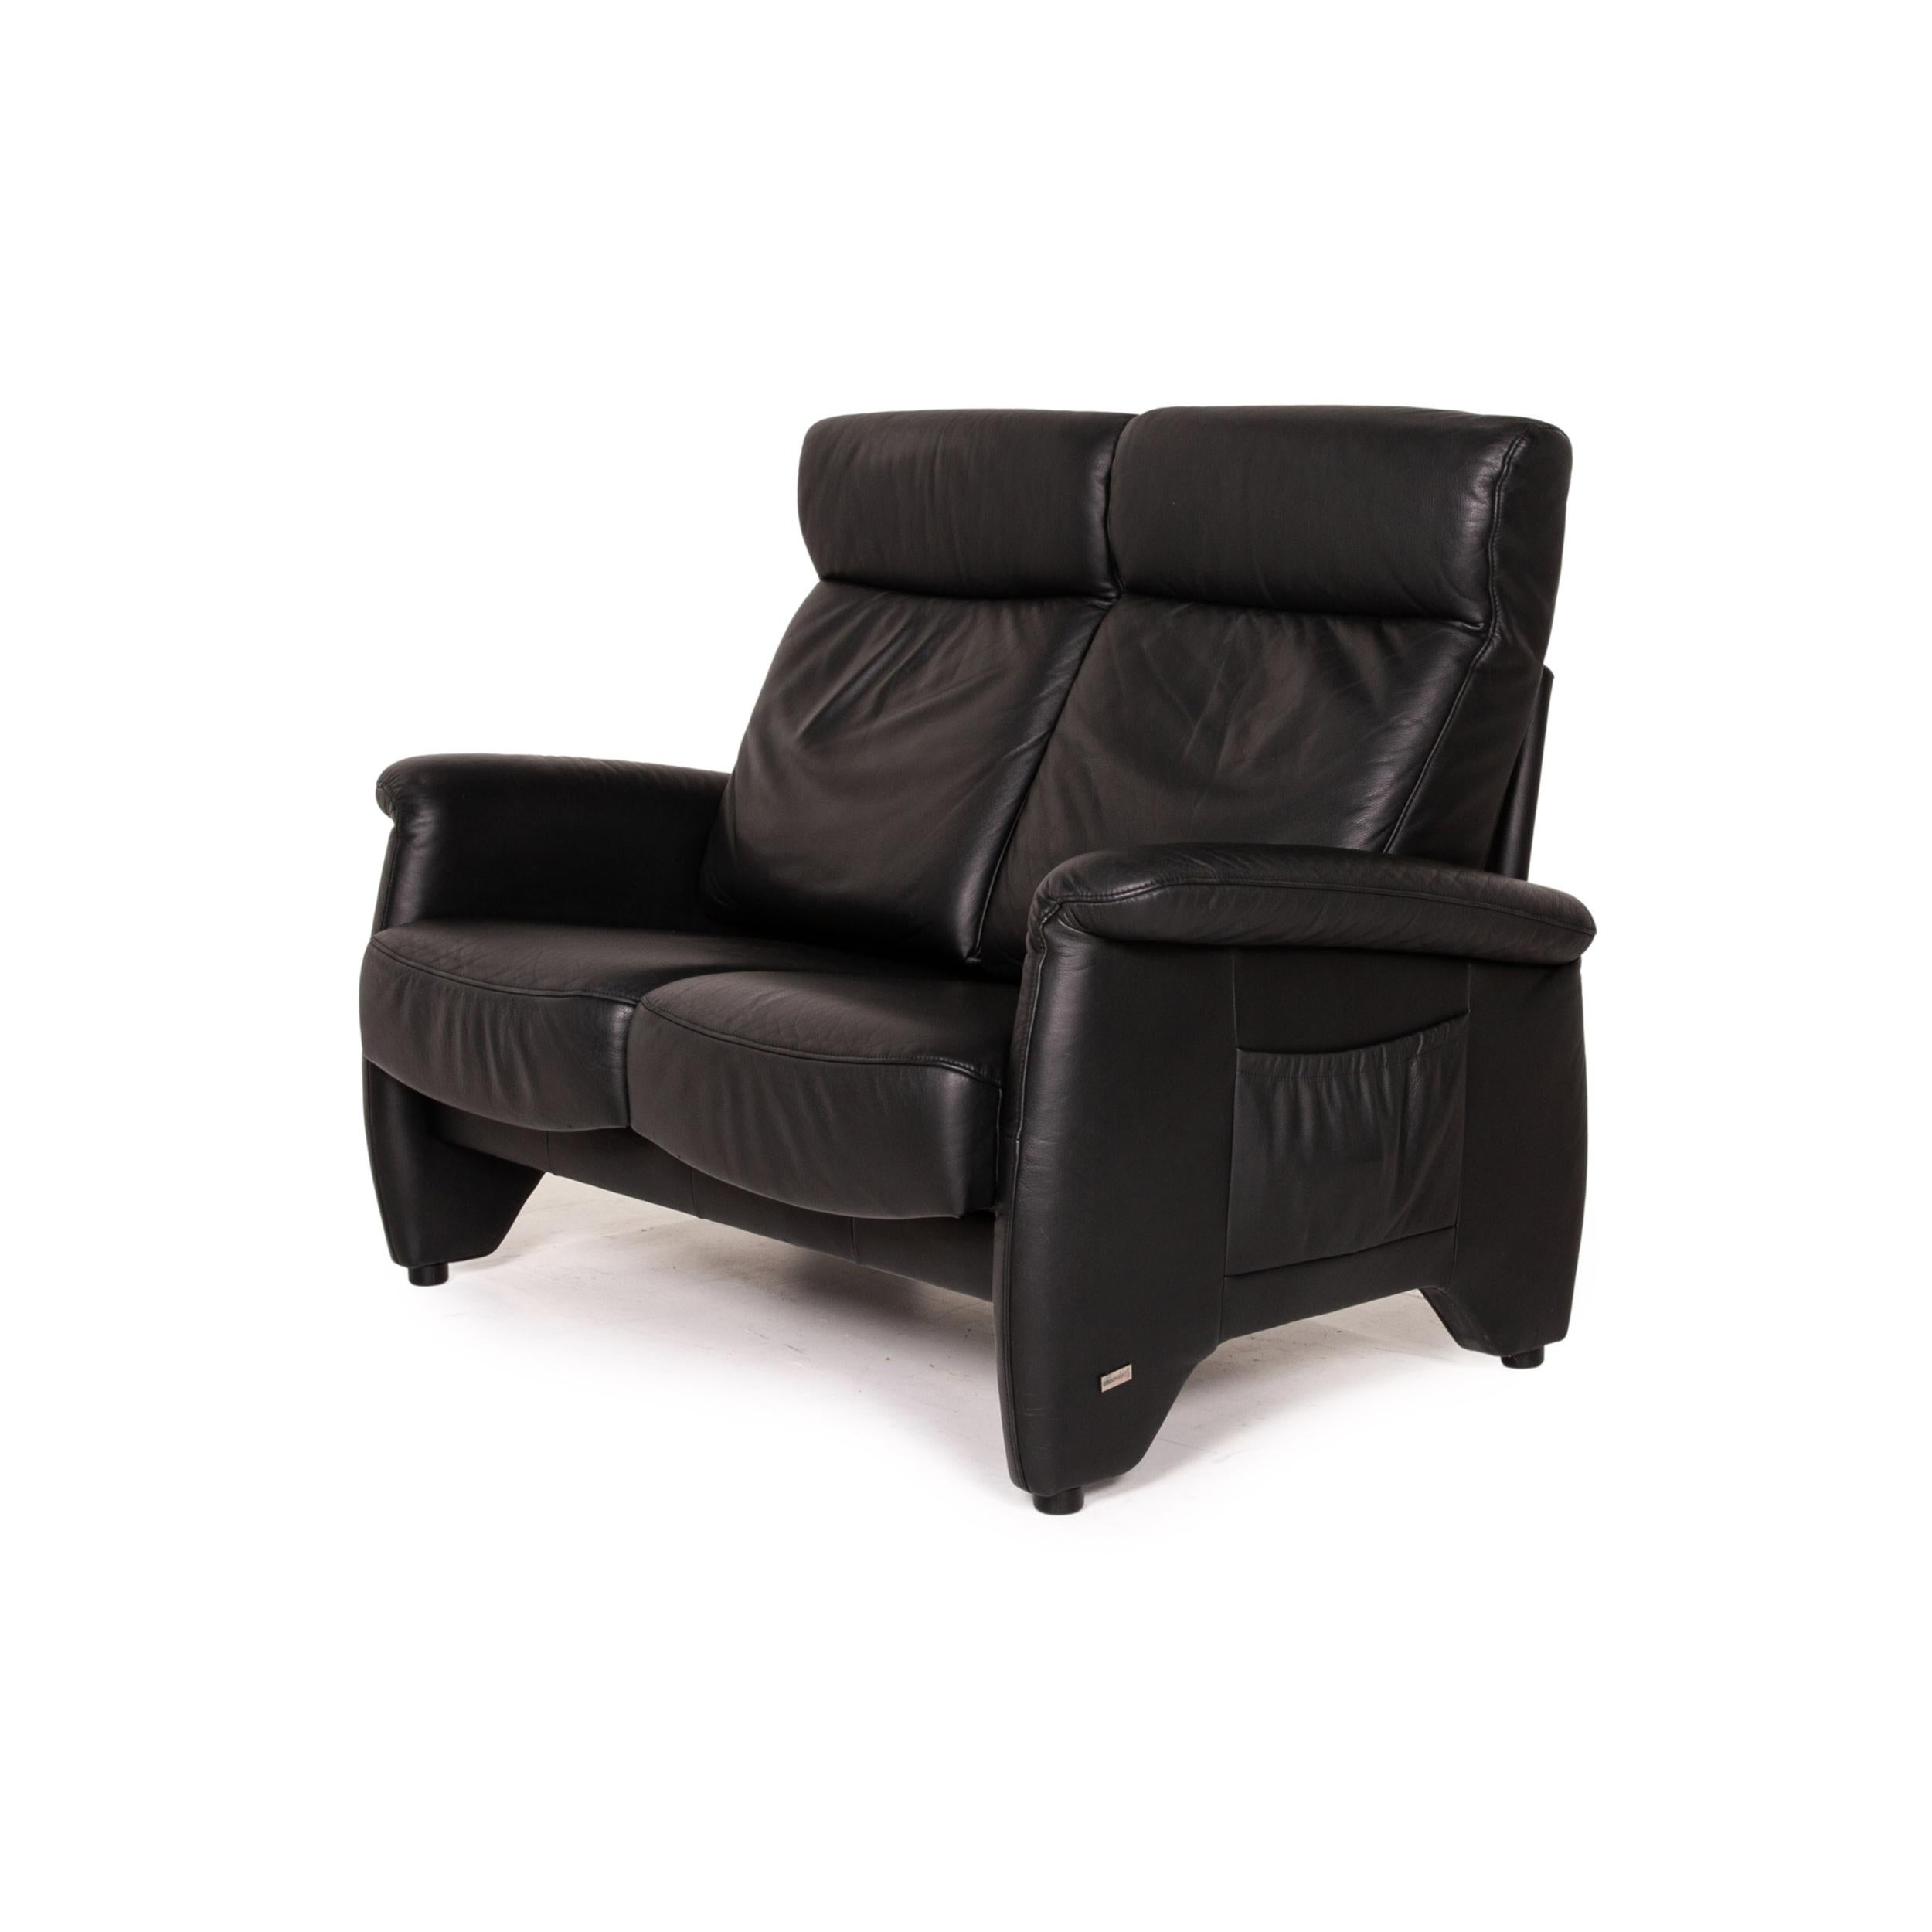 Modern Himolla Ergoline Leather Sofa Black Two-Seater Function Couch For Sale